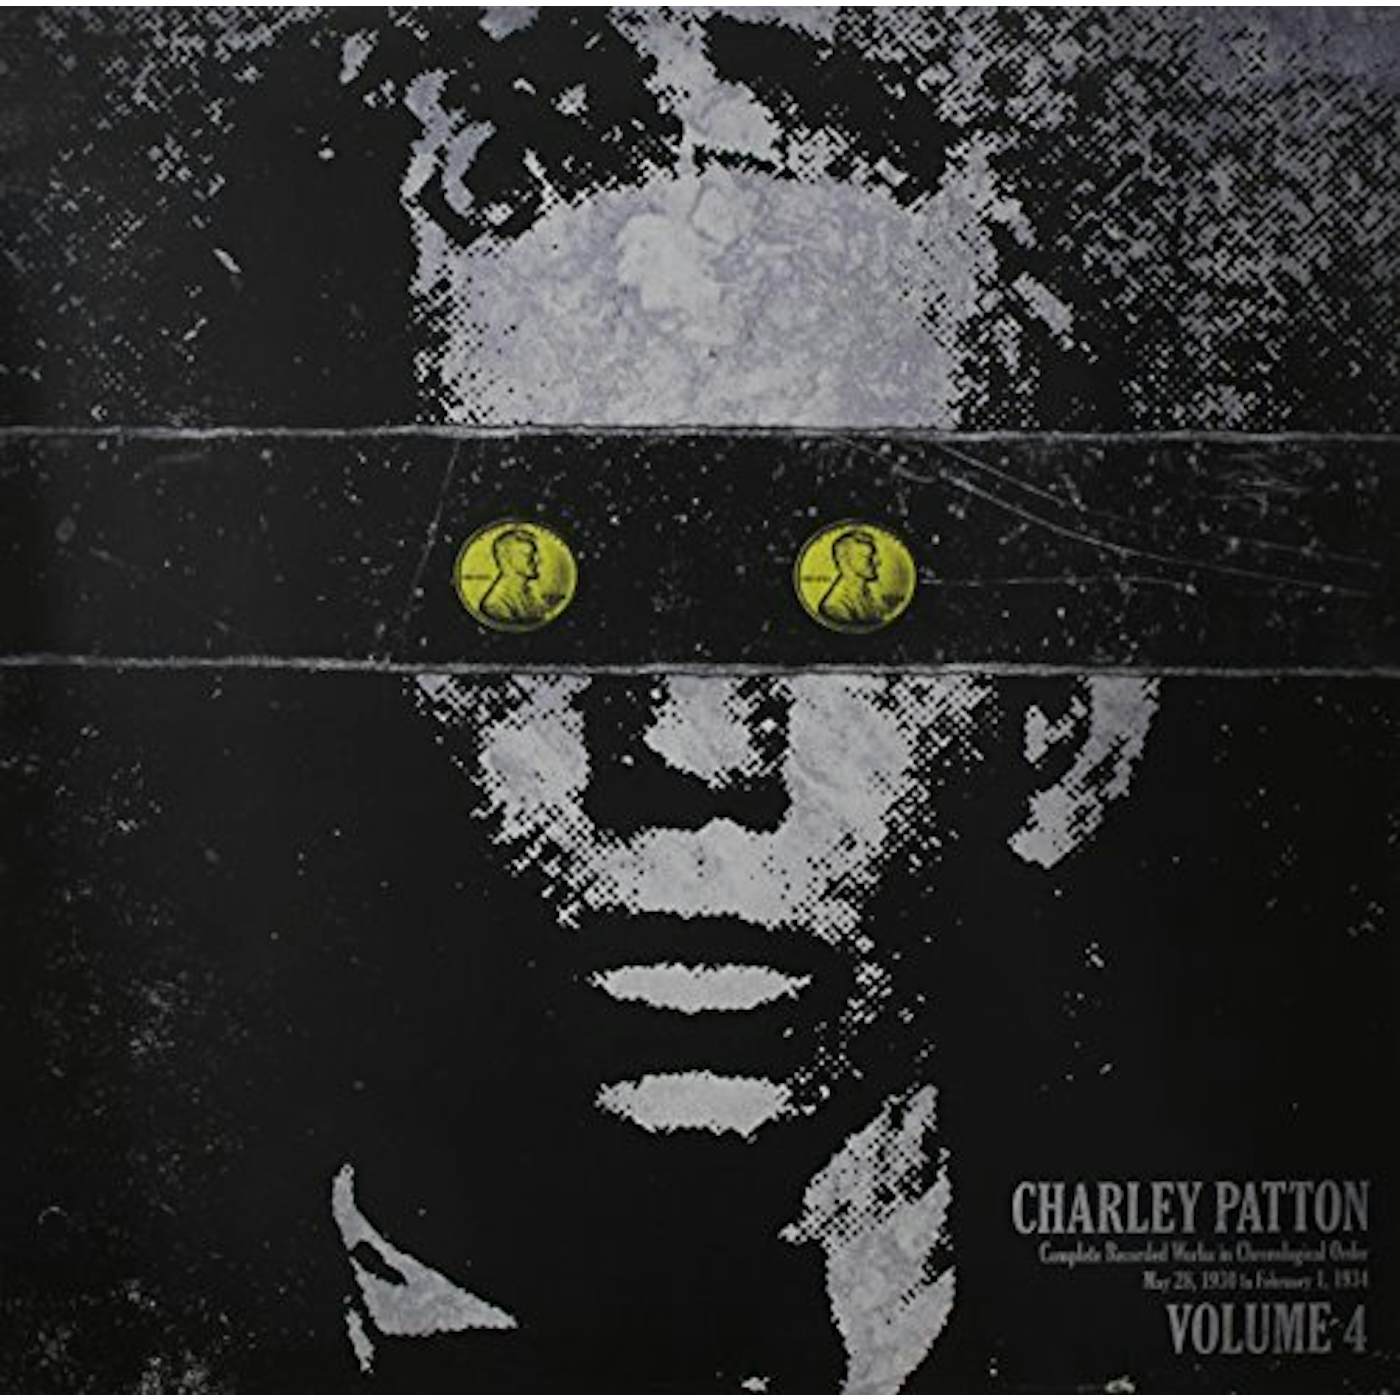 Charley Patton COMPLETE RECORDED WORKS IN CHRONOLOGICAL ORDER 4 Vinyl Record